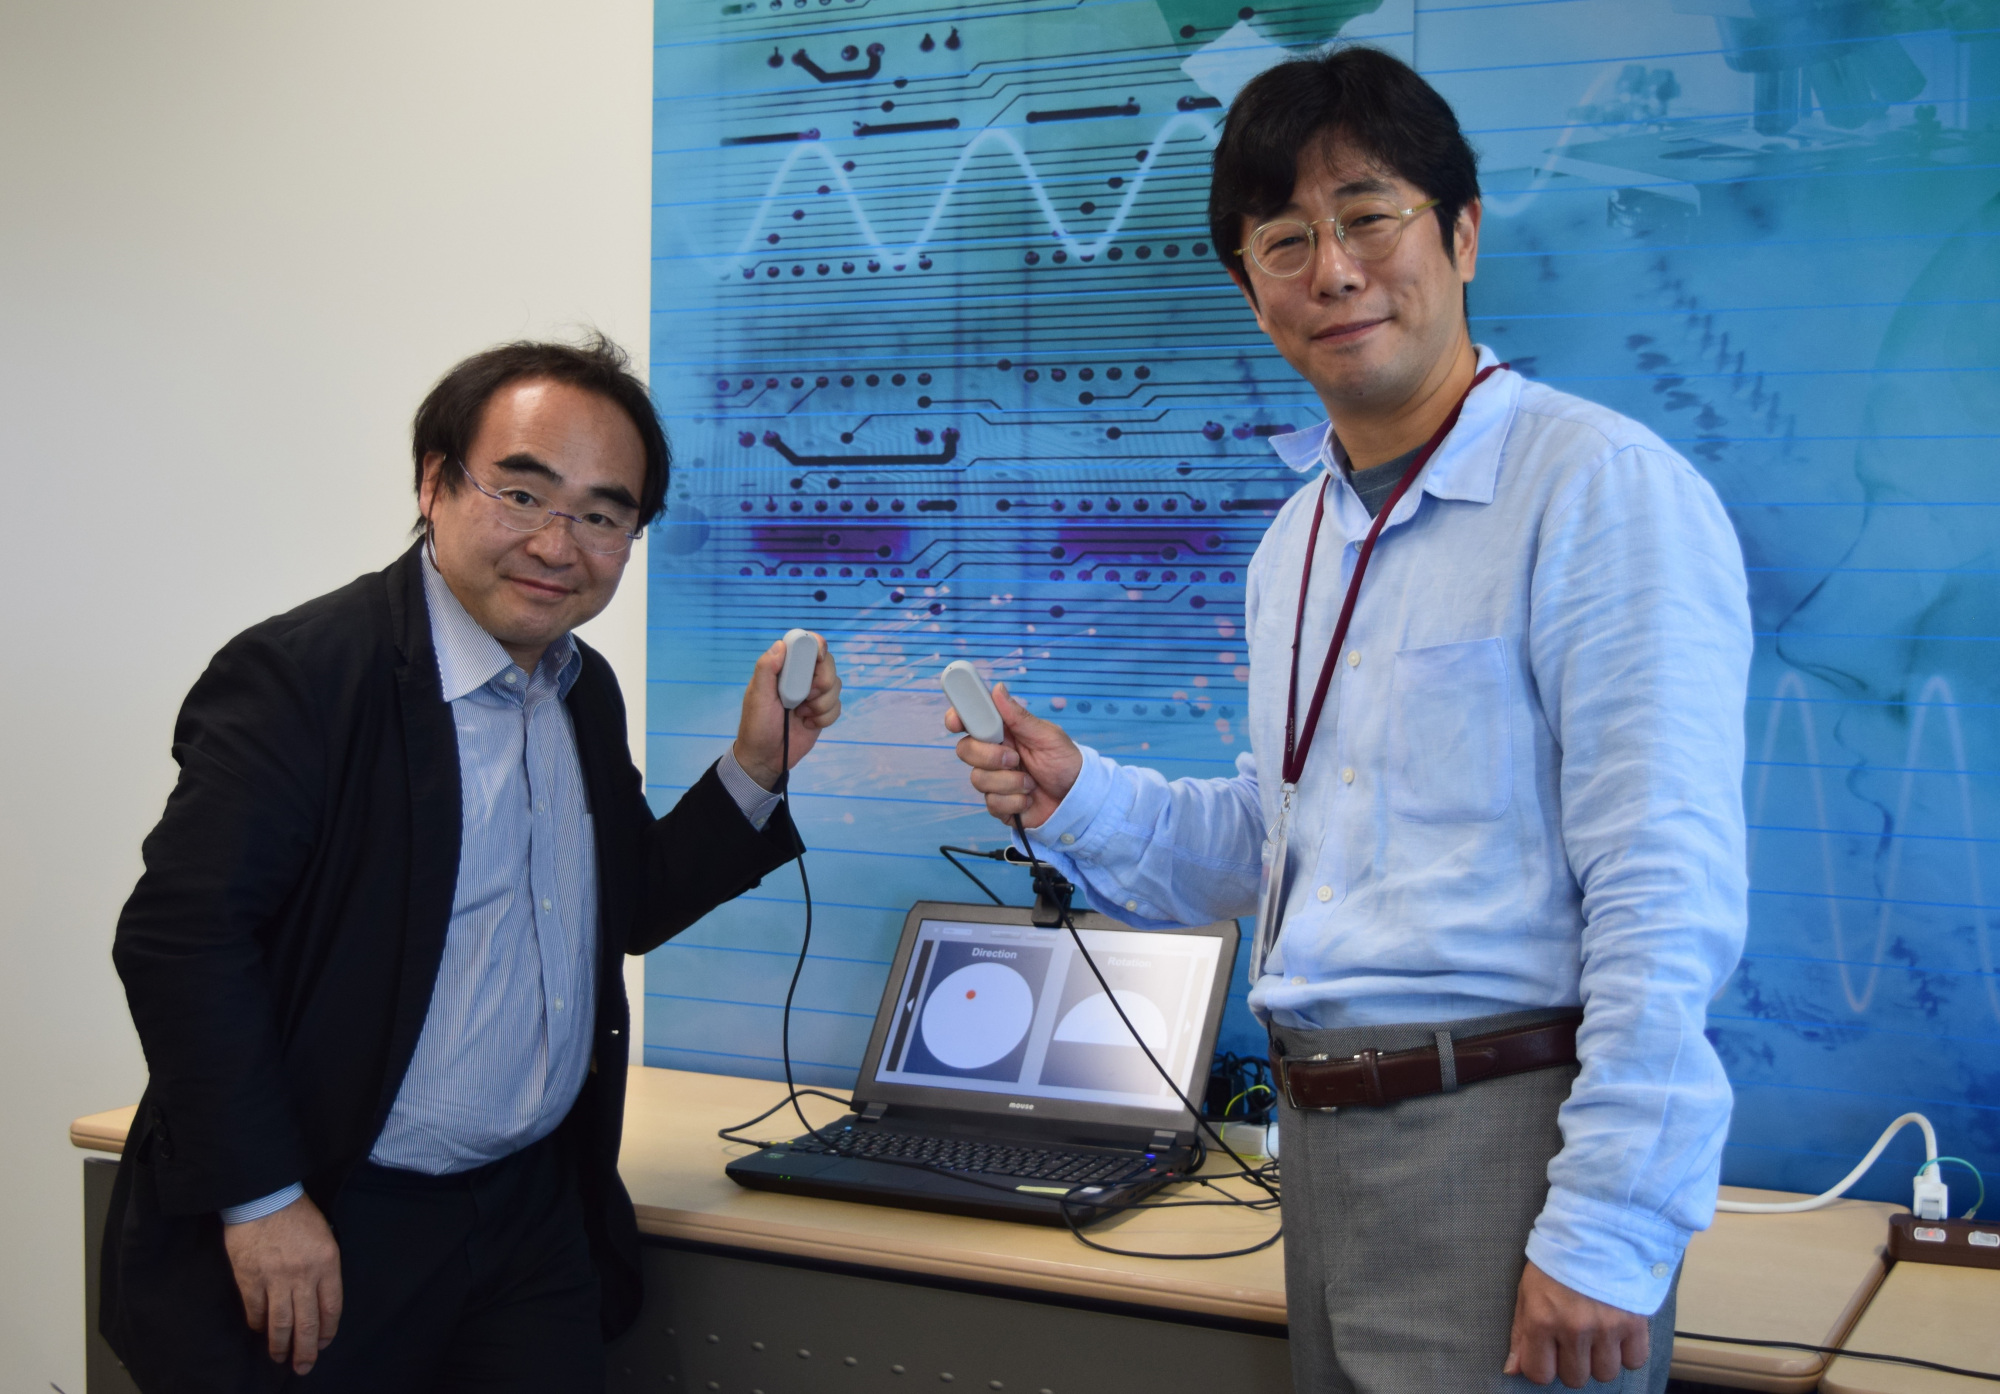 Miraisens Inc. CEO Natsuo Koda (right) and founder and Chief Technology Officer Norio Nakamura hold a palm-sized device equipped with 3D Haptics, which can recreate a variety of touch sensations in a three-dimensional space. | MASUMI KOIZUMI